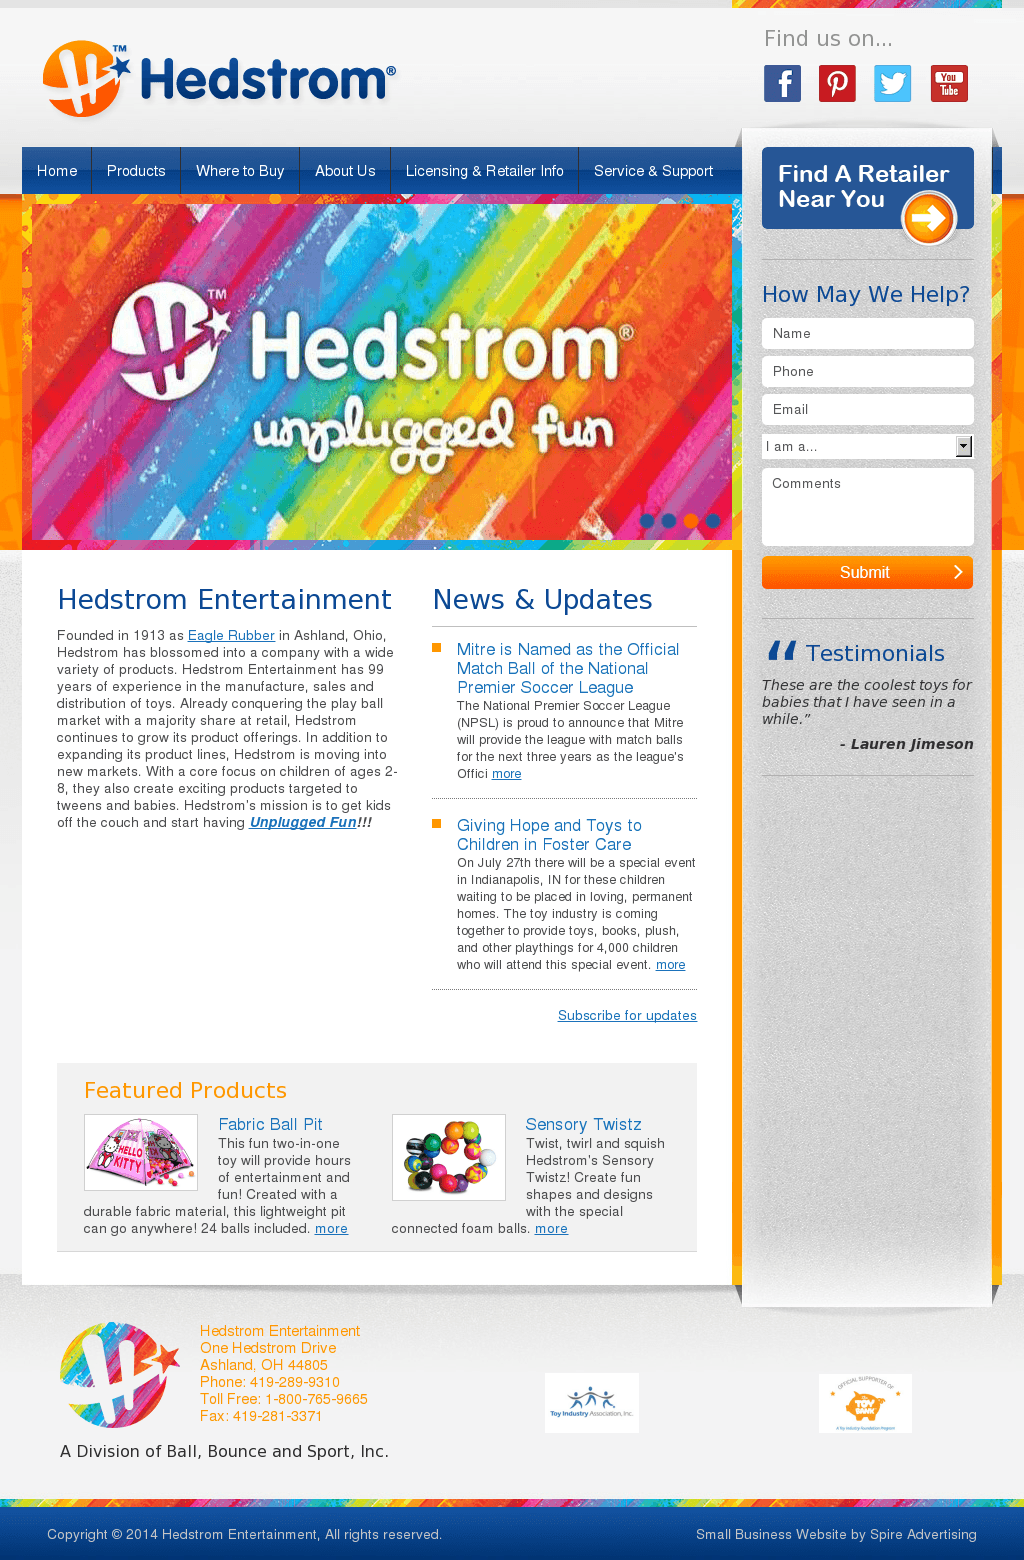 Hedstrom Logo - Hedstrom Competitors, Revenue and Employees Company Profile